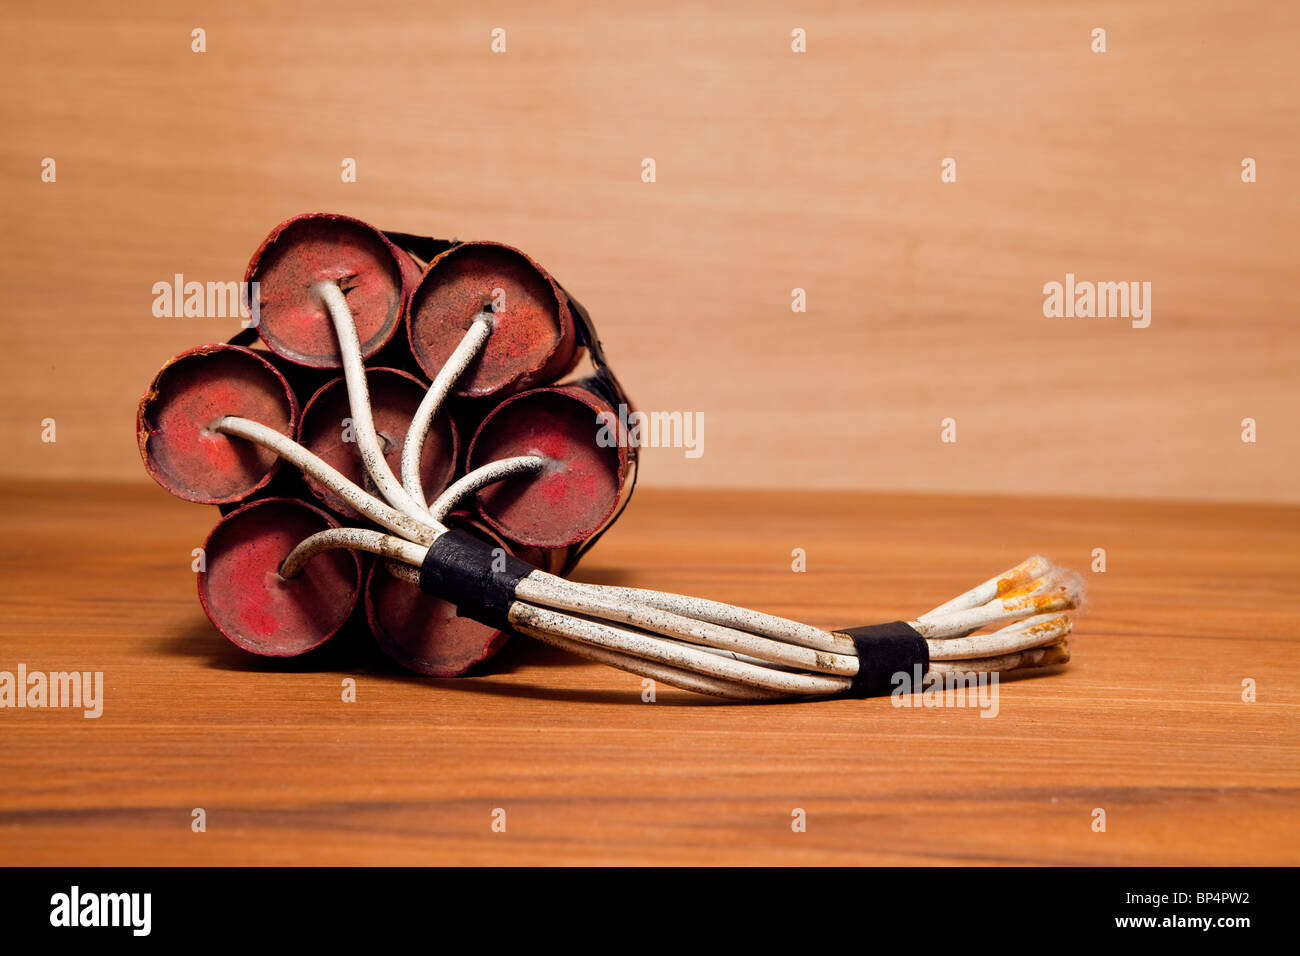 TNT,dynamite,explosive red,wood,bomb,indoors Stock Photo